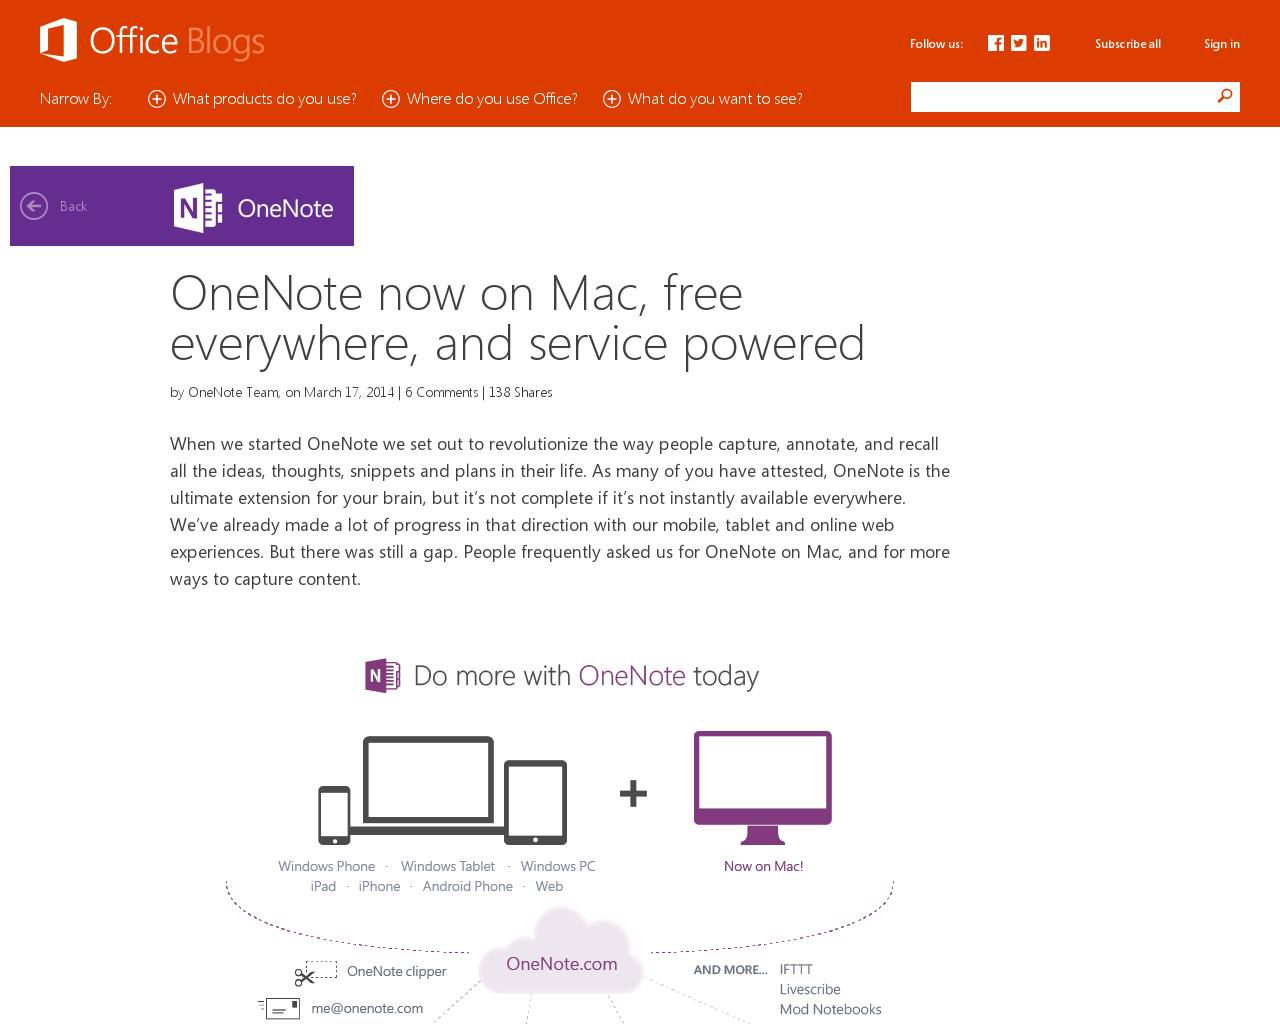 onenote for mac indexing?